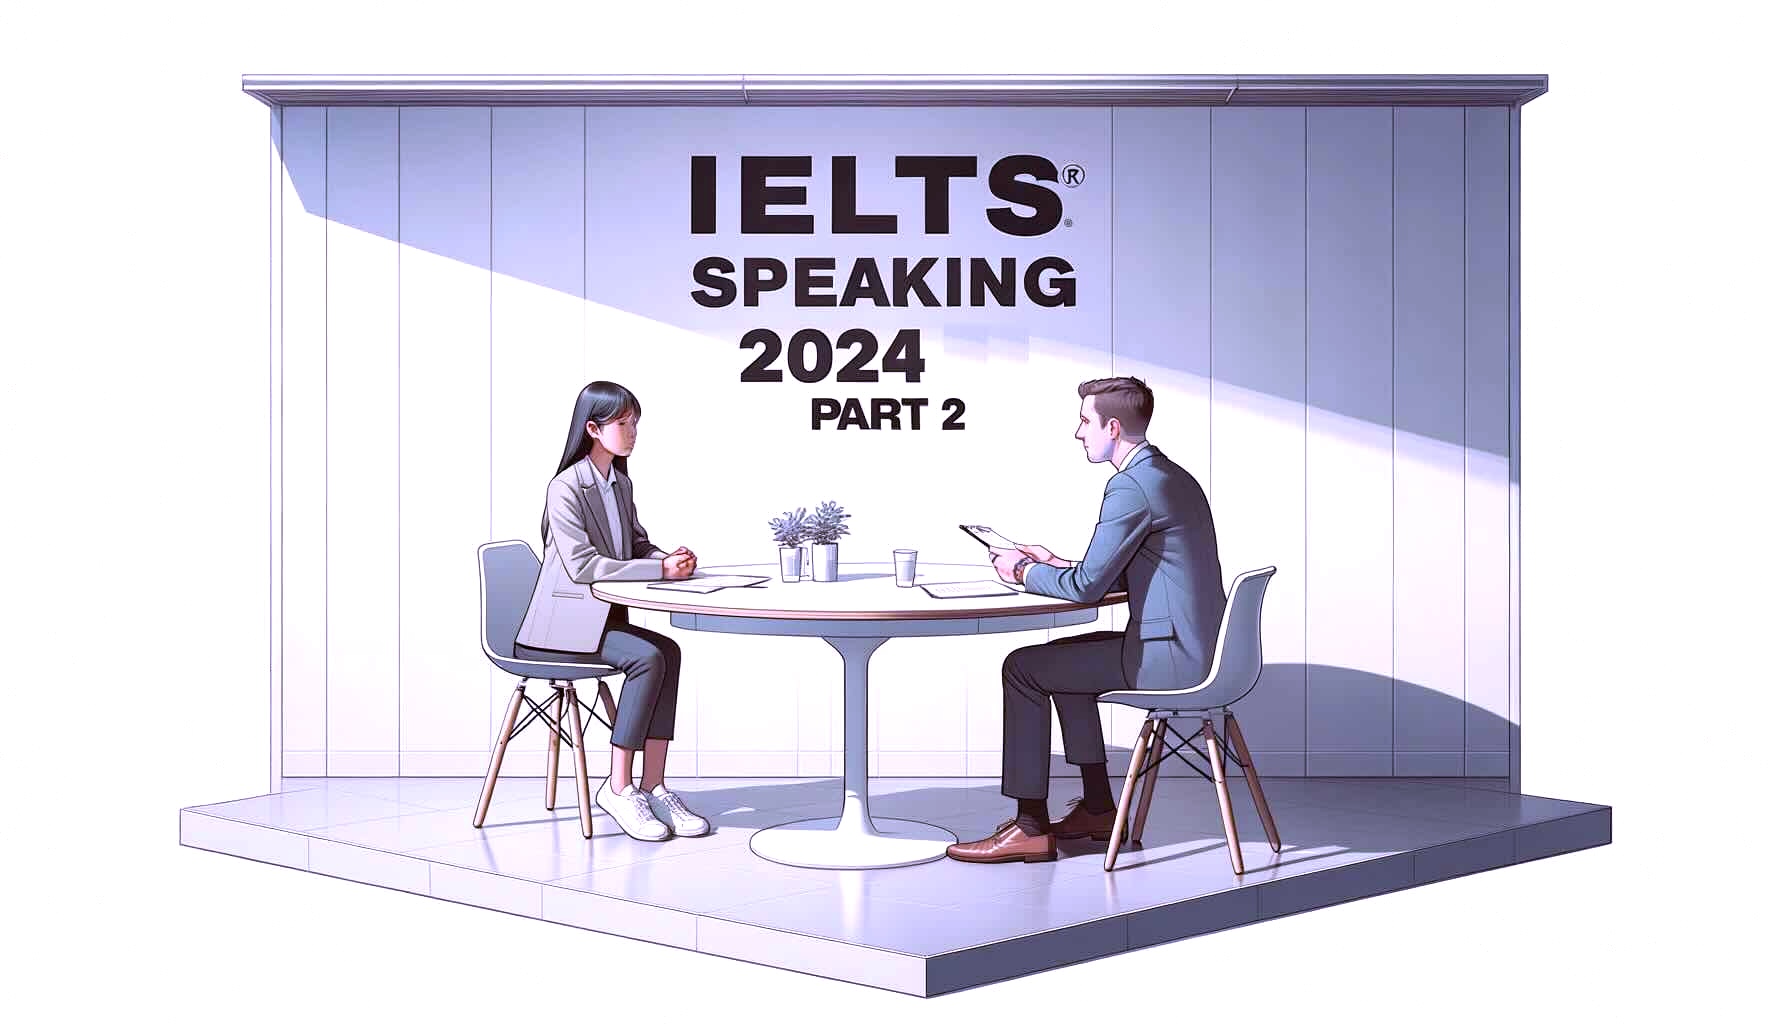 IELTS Speaking Part 2: Describe something you own that you want to replace